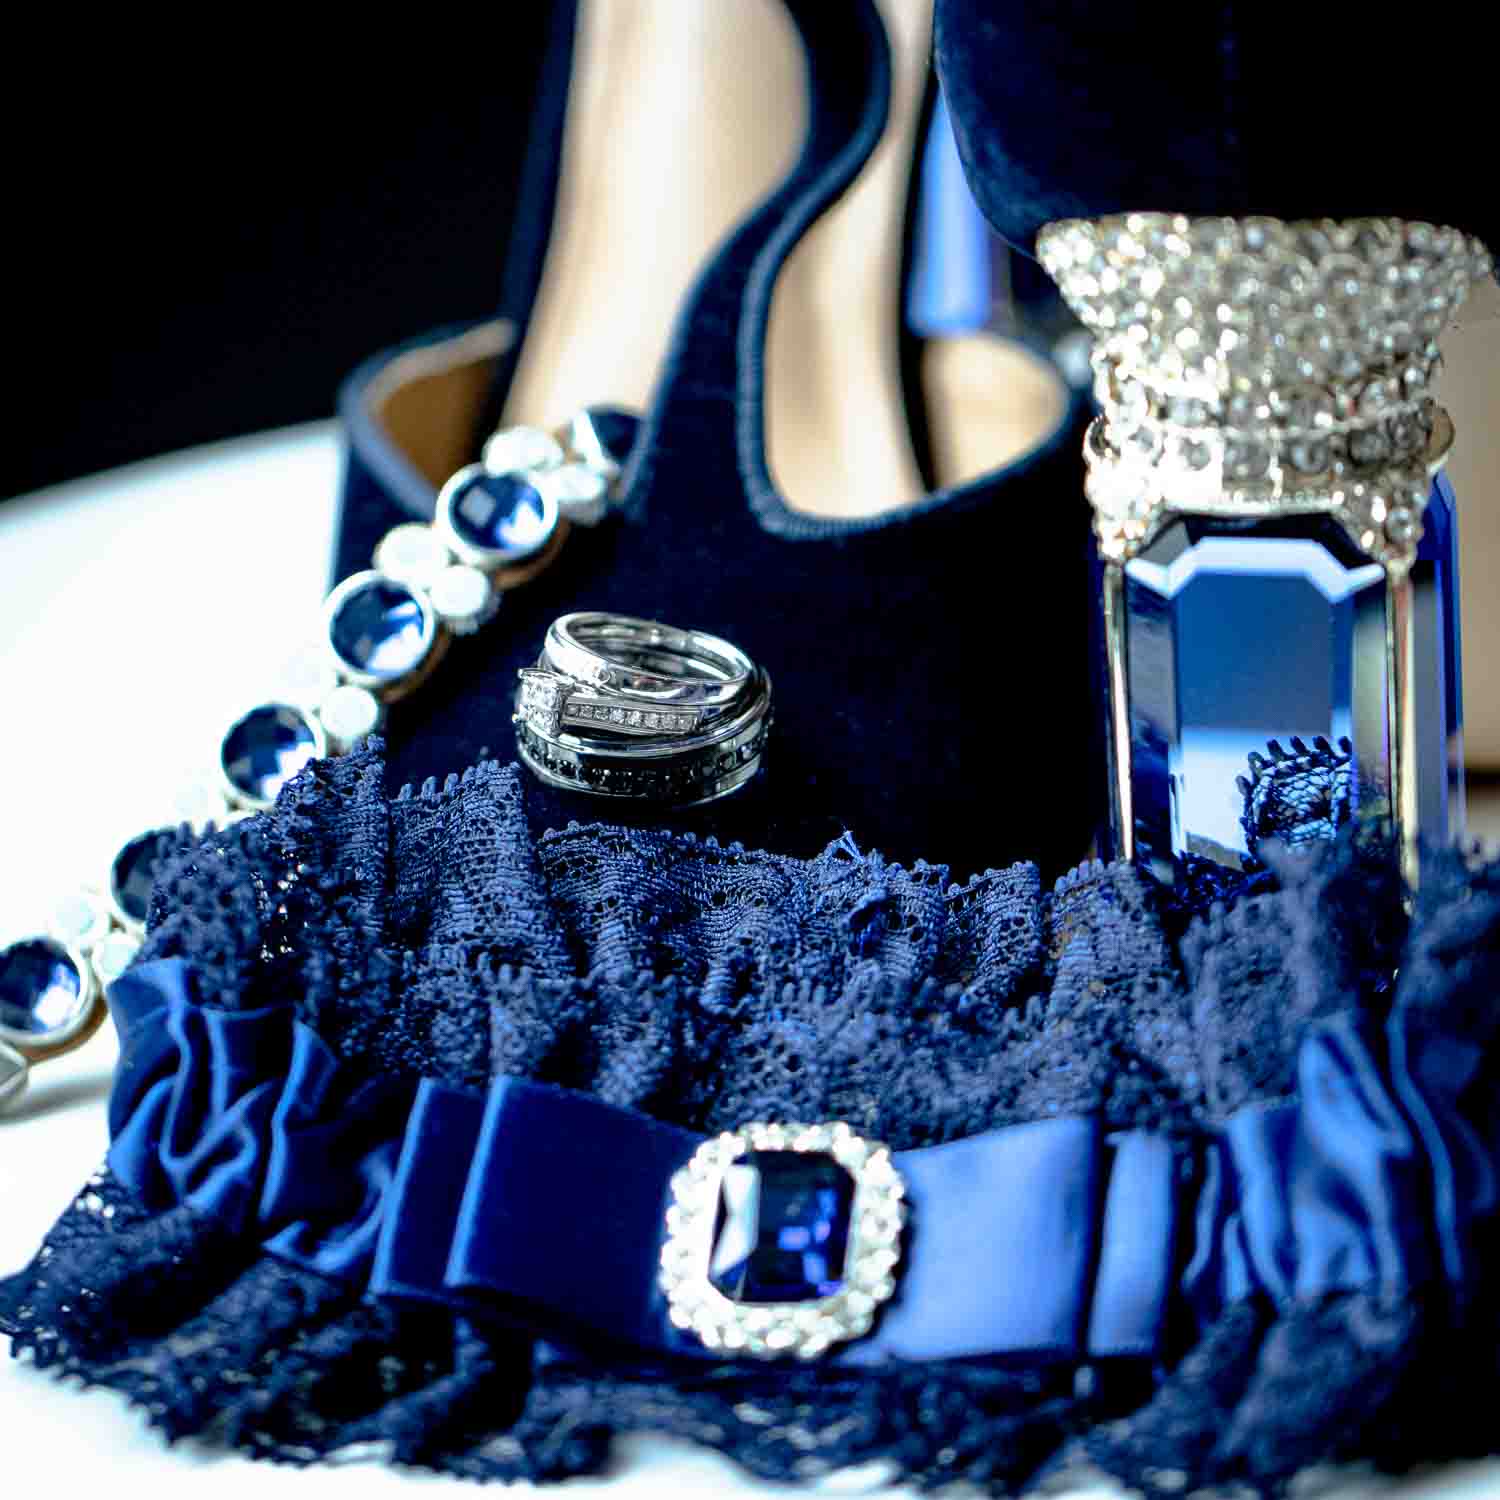 Wedding photography. Bridal details. Deep blue garter with sapphire and rhinestone accent. Sapphire and white gold bracelet. Navy Blue pumps with sapphire and crystal heel. Engagement ring and wedding bands. Something old, something new, something borrowed, something blue and a sixpence in her shoe. 10 best photographers near Lake George, NY.  Wedding Photographer. Albany, Lake Luzerne, NY.